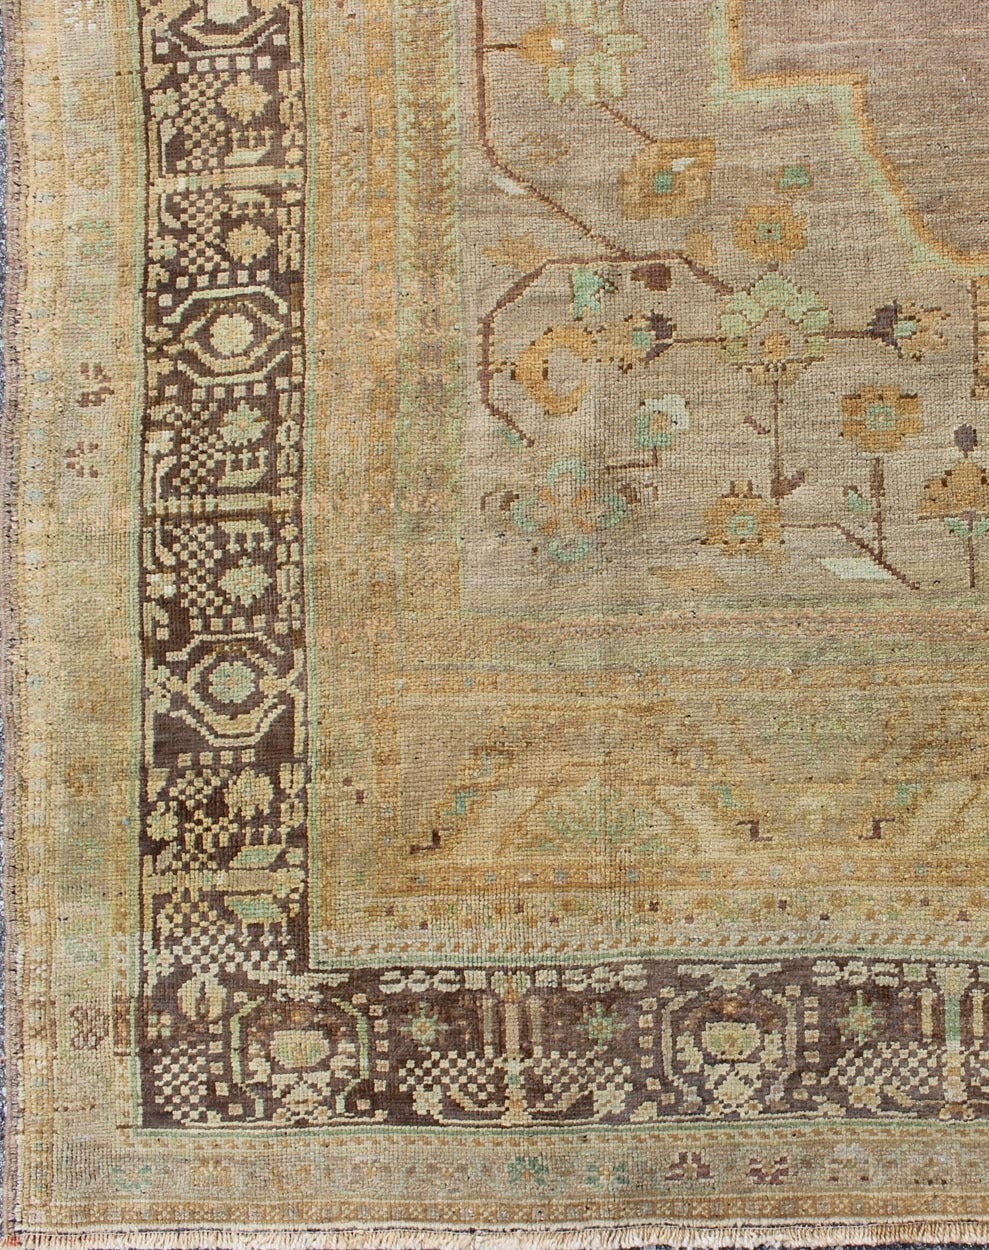 This beautiful Oushak showcases a unique color pallet of elegant gold, lavender, gray and soft purple, accented by pale blue, sage green, and highlighted by light brown and mocha colors. A delicate center medallion accentuates a botanic theme and is